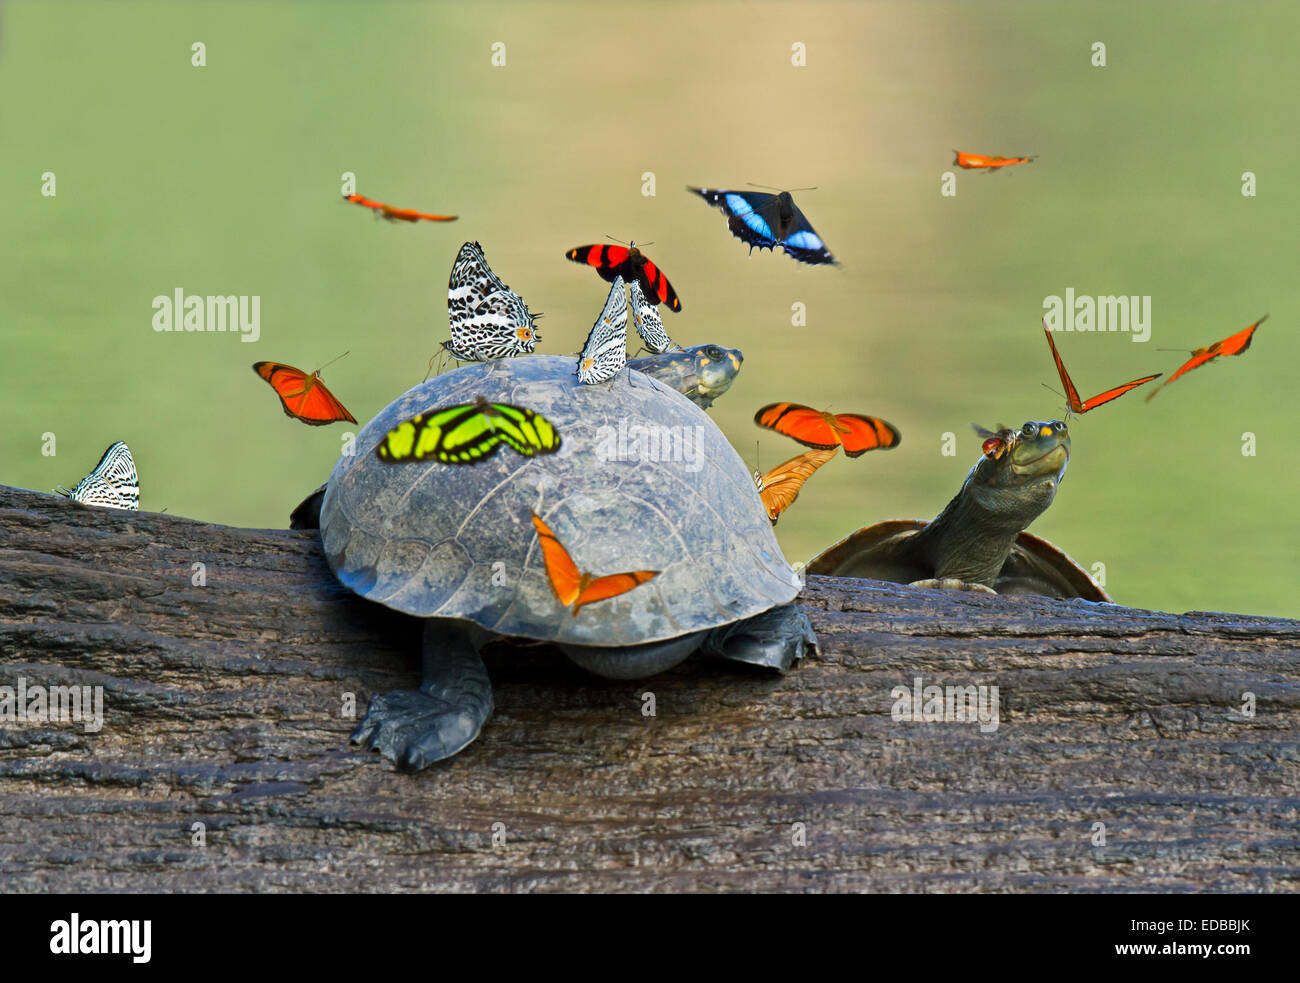 Butterflies hover above a Yellow-spotted Amazon river turtle, Tambopata National Reserve, Madre de Dios, Peru Stock Photo